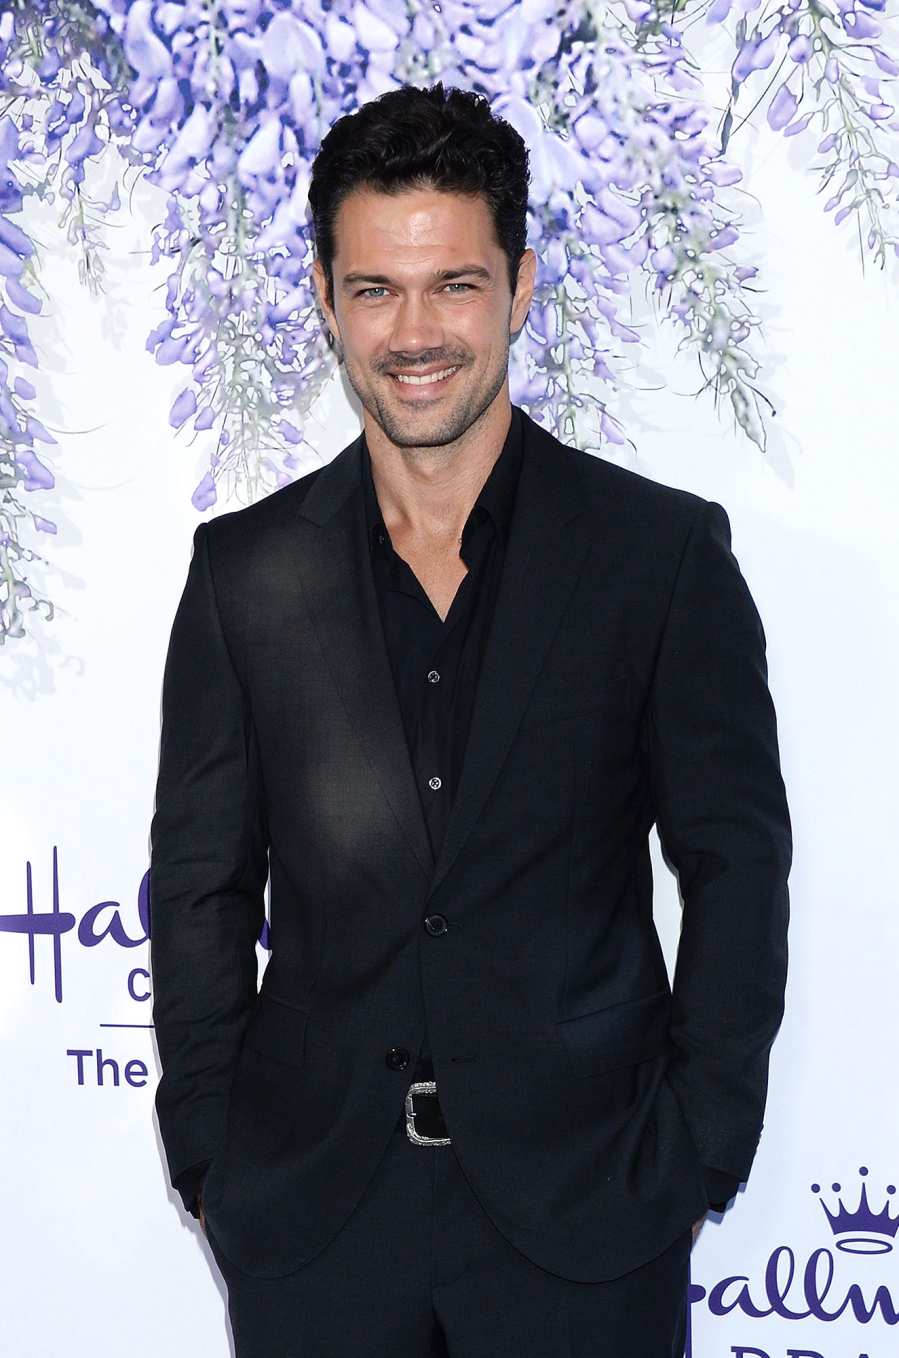 Where Is He From Who Is Hallmark Channel’s Ryan Paevey 5 Things to Know